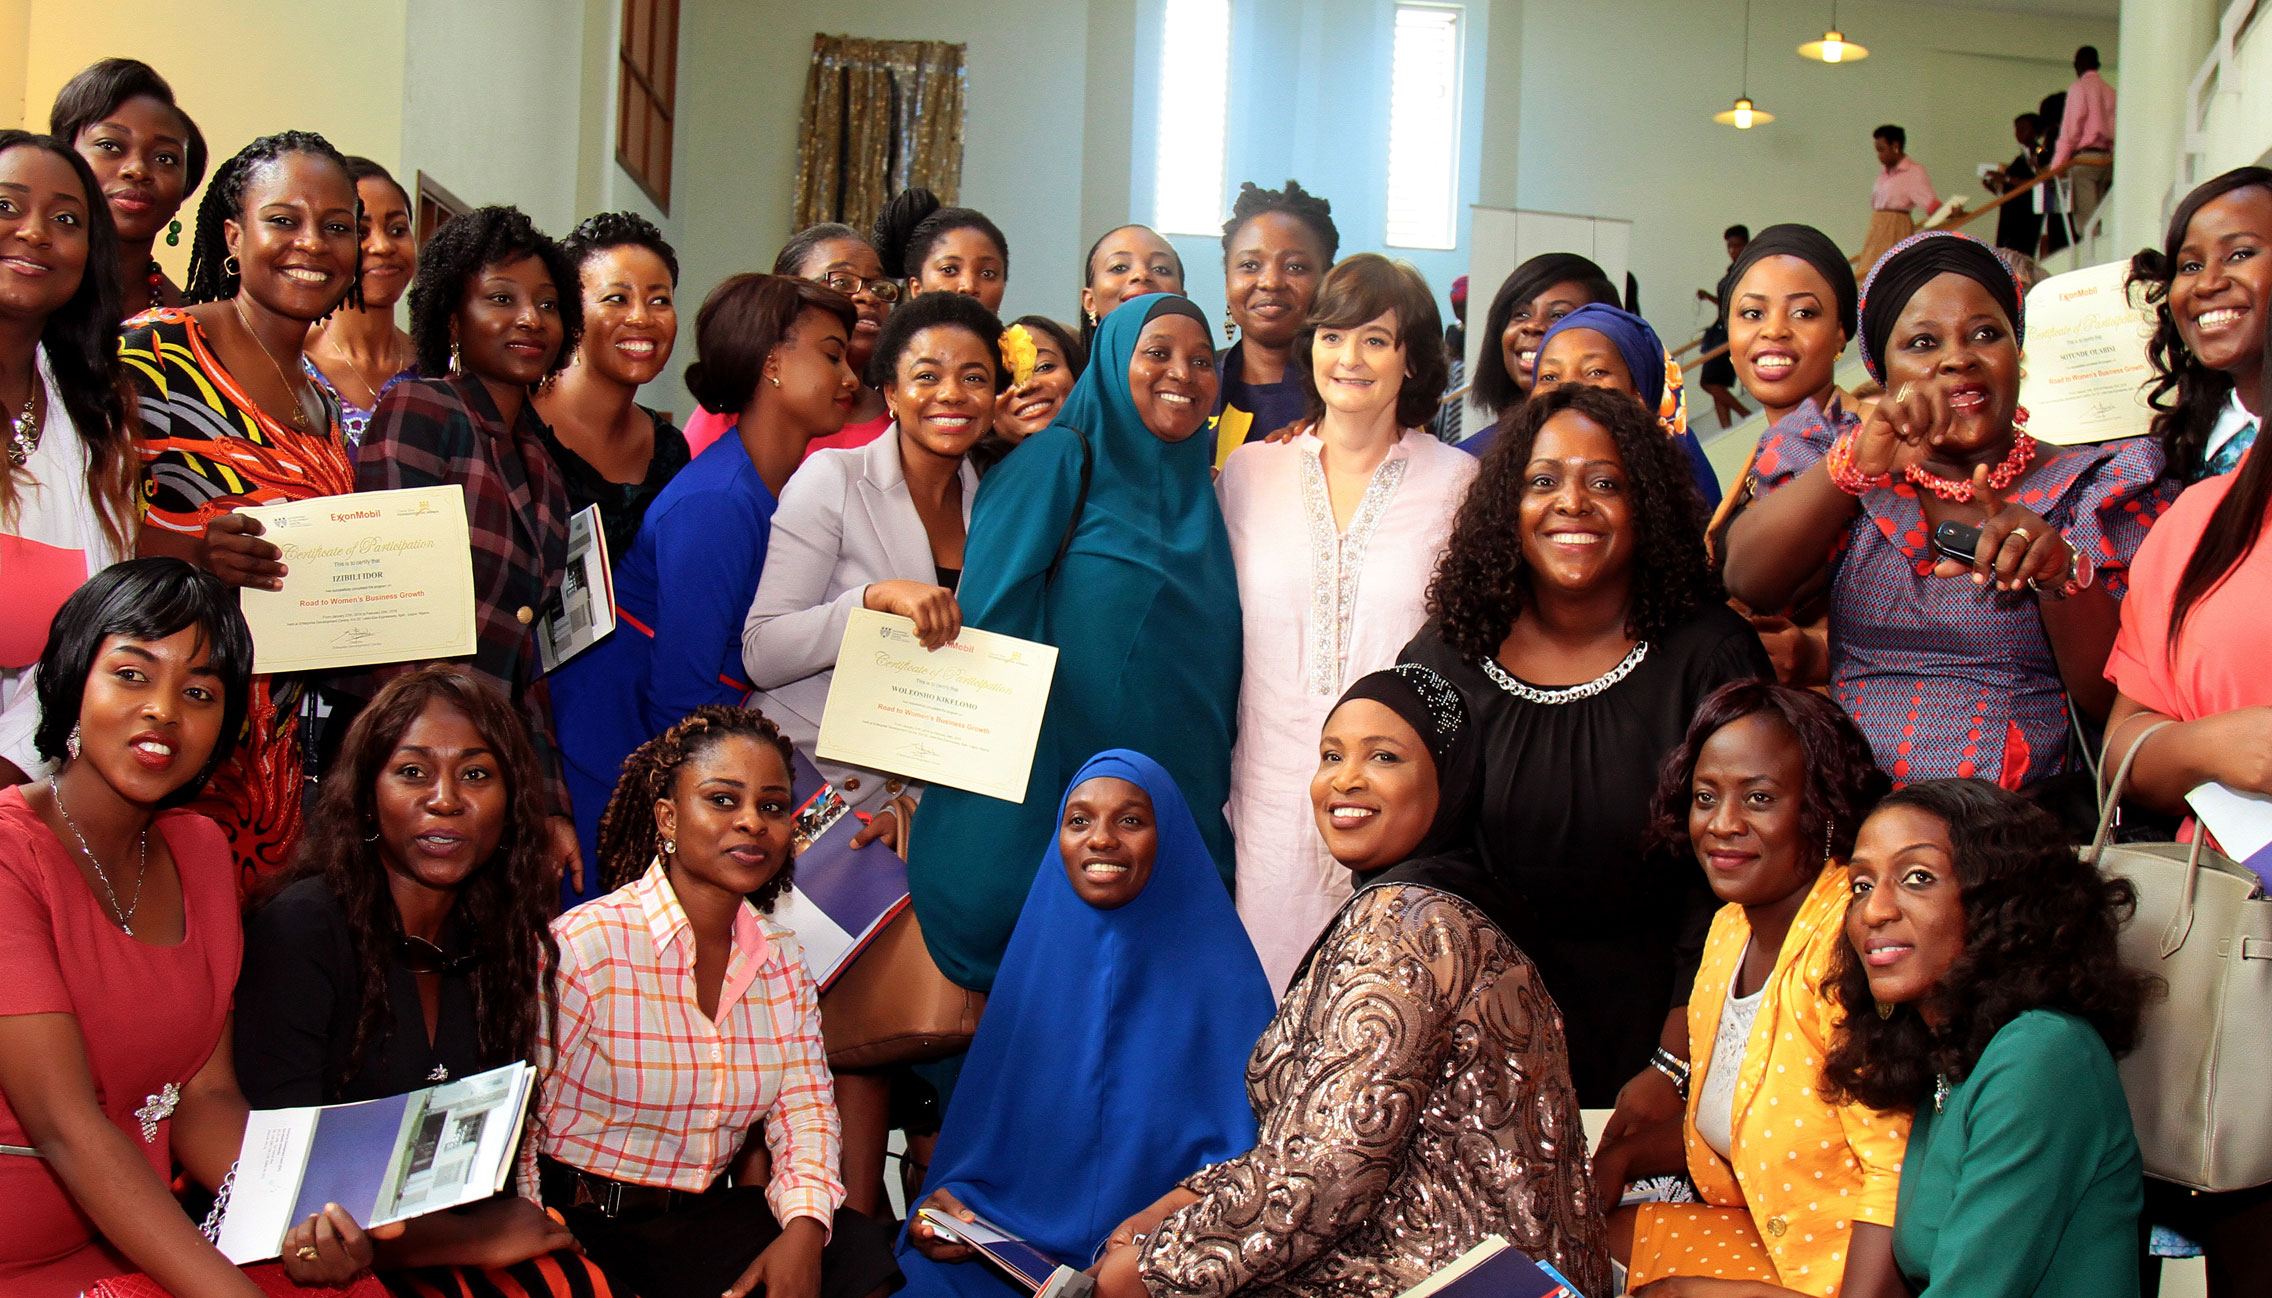 A group of women attend an event sponsored by the Cherie Blair Foundation for Women and ExxonMobil